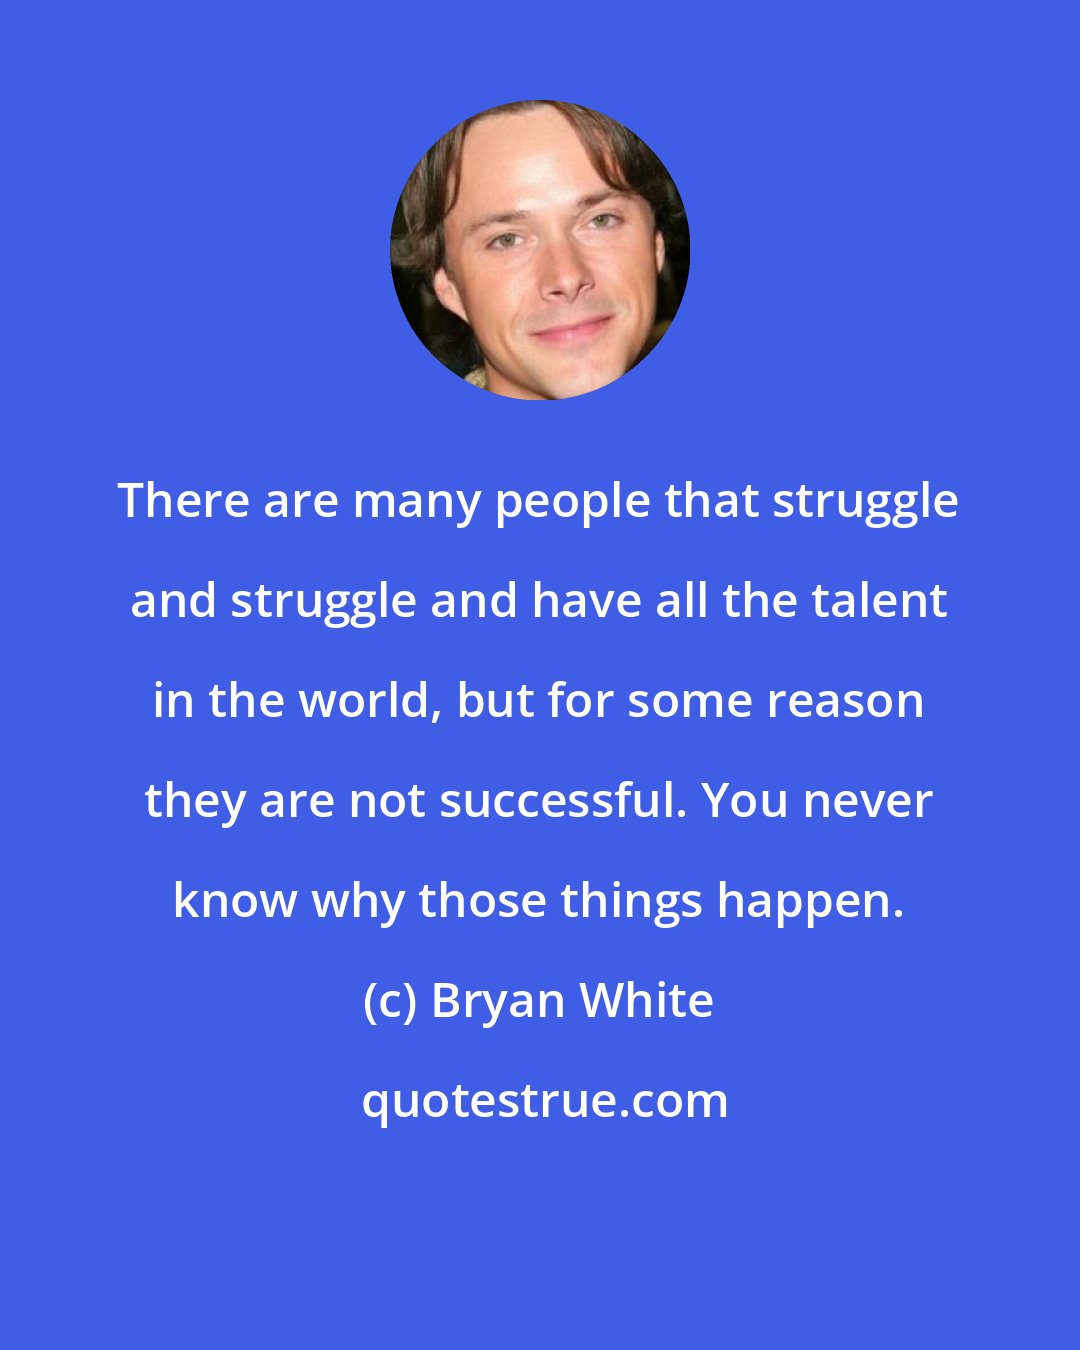 Bryan White: There are many people that struggle and struggle and have all the talent in the world, but for some reason they are not successful. You never know why those things happen.